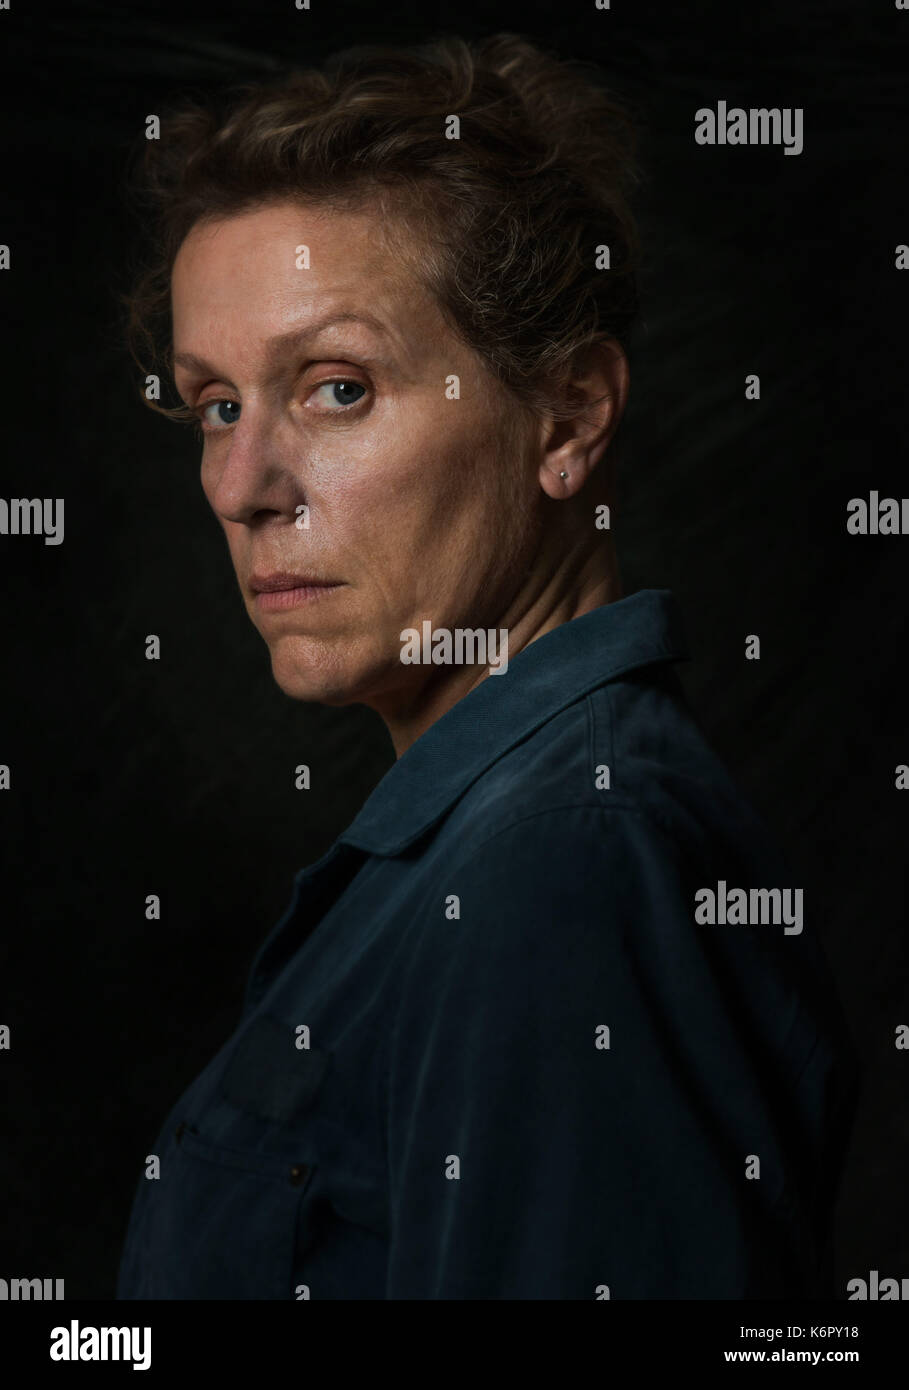 RELEASE DATE: November 10, 2017 TITLE: Three Billboards Outside Ebbing, Missouri STUDIO: Fox Searchlight Pictures DIRECTOR: Martin McDonagh PLOT: In this darkly comic drama, a mother personally challenges the local authorities to solve her daughter's murder, when they fail to catch the culprit STARRING: FRANCES MCDORMAND as Mildred Hayes. (Credit Image: © Fox Searchlight Pictures/Entertainment Pictures) Stock Photo